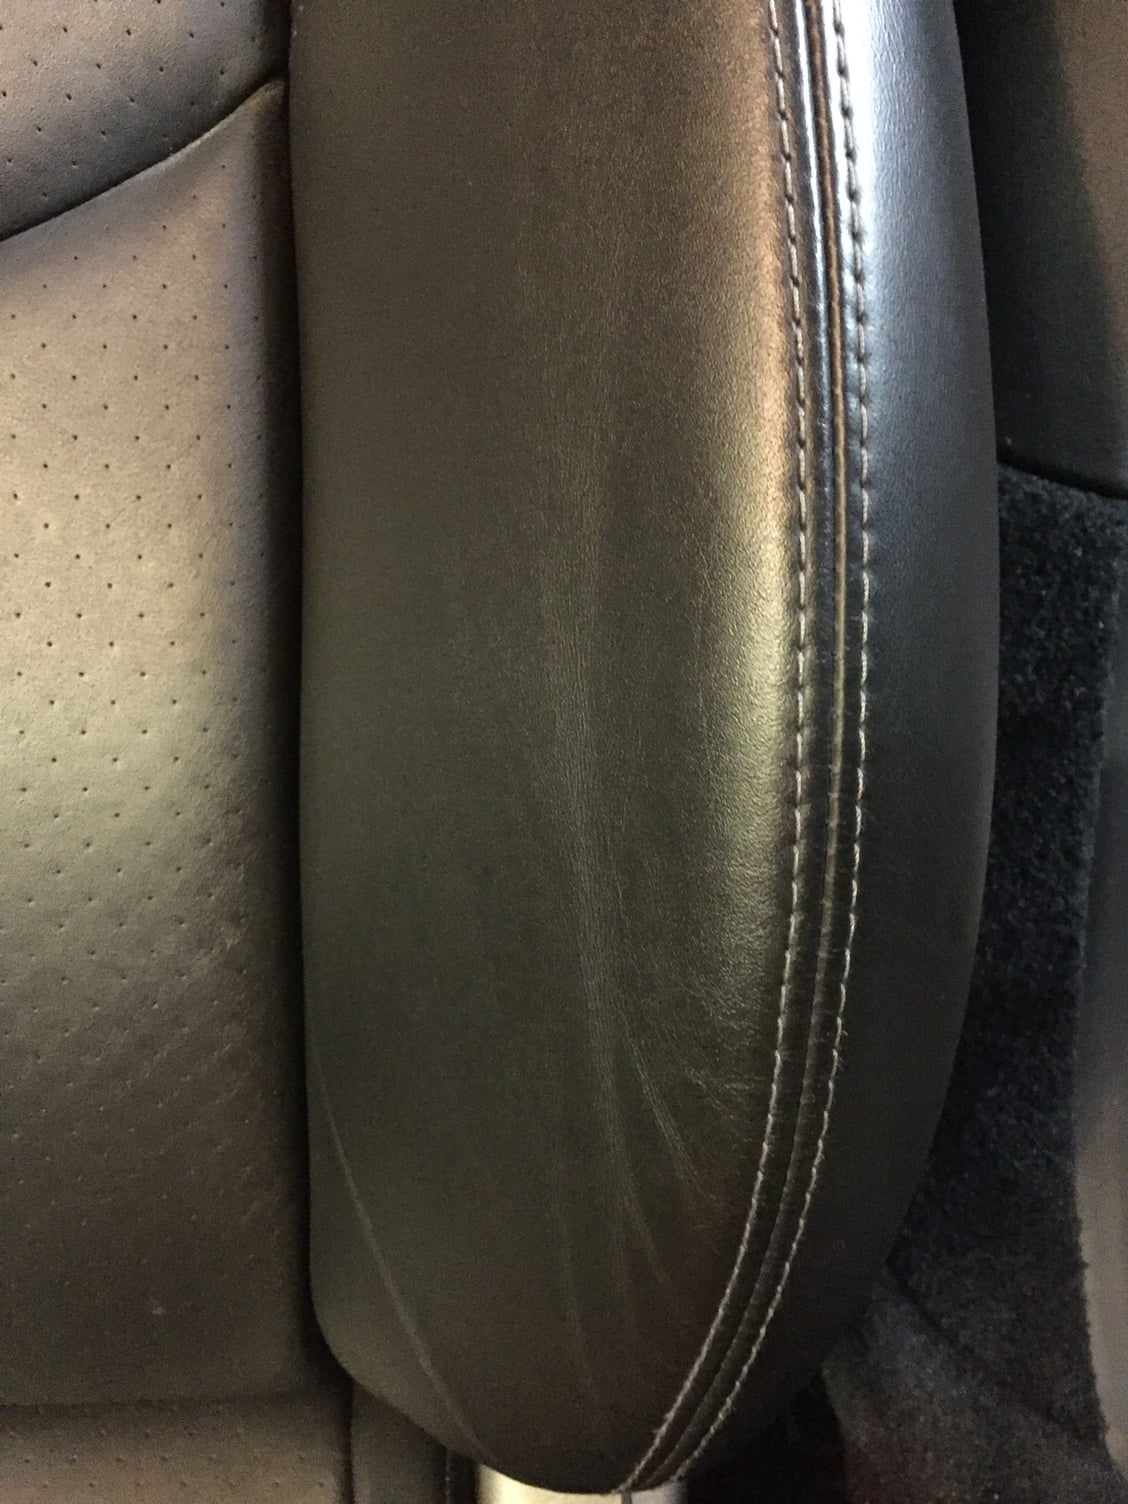 Leatherique before & after :WOW: - 6SpeedOnline - Porsche Forum and ...